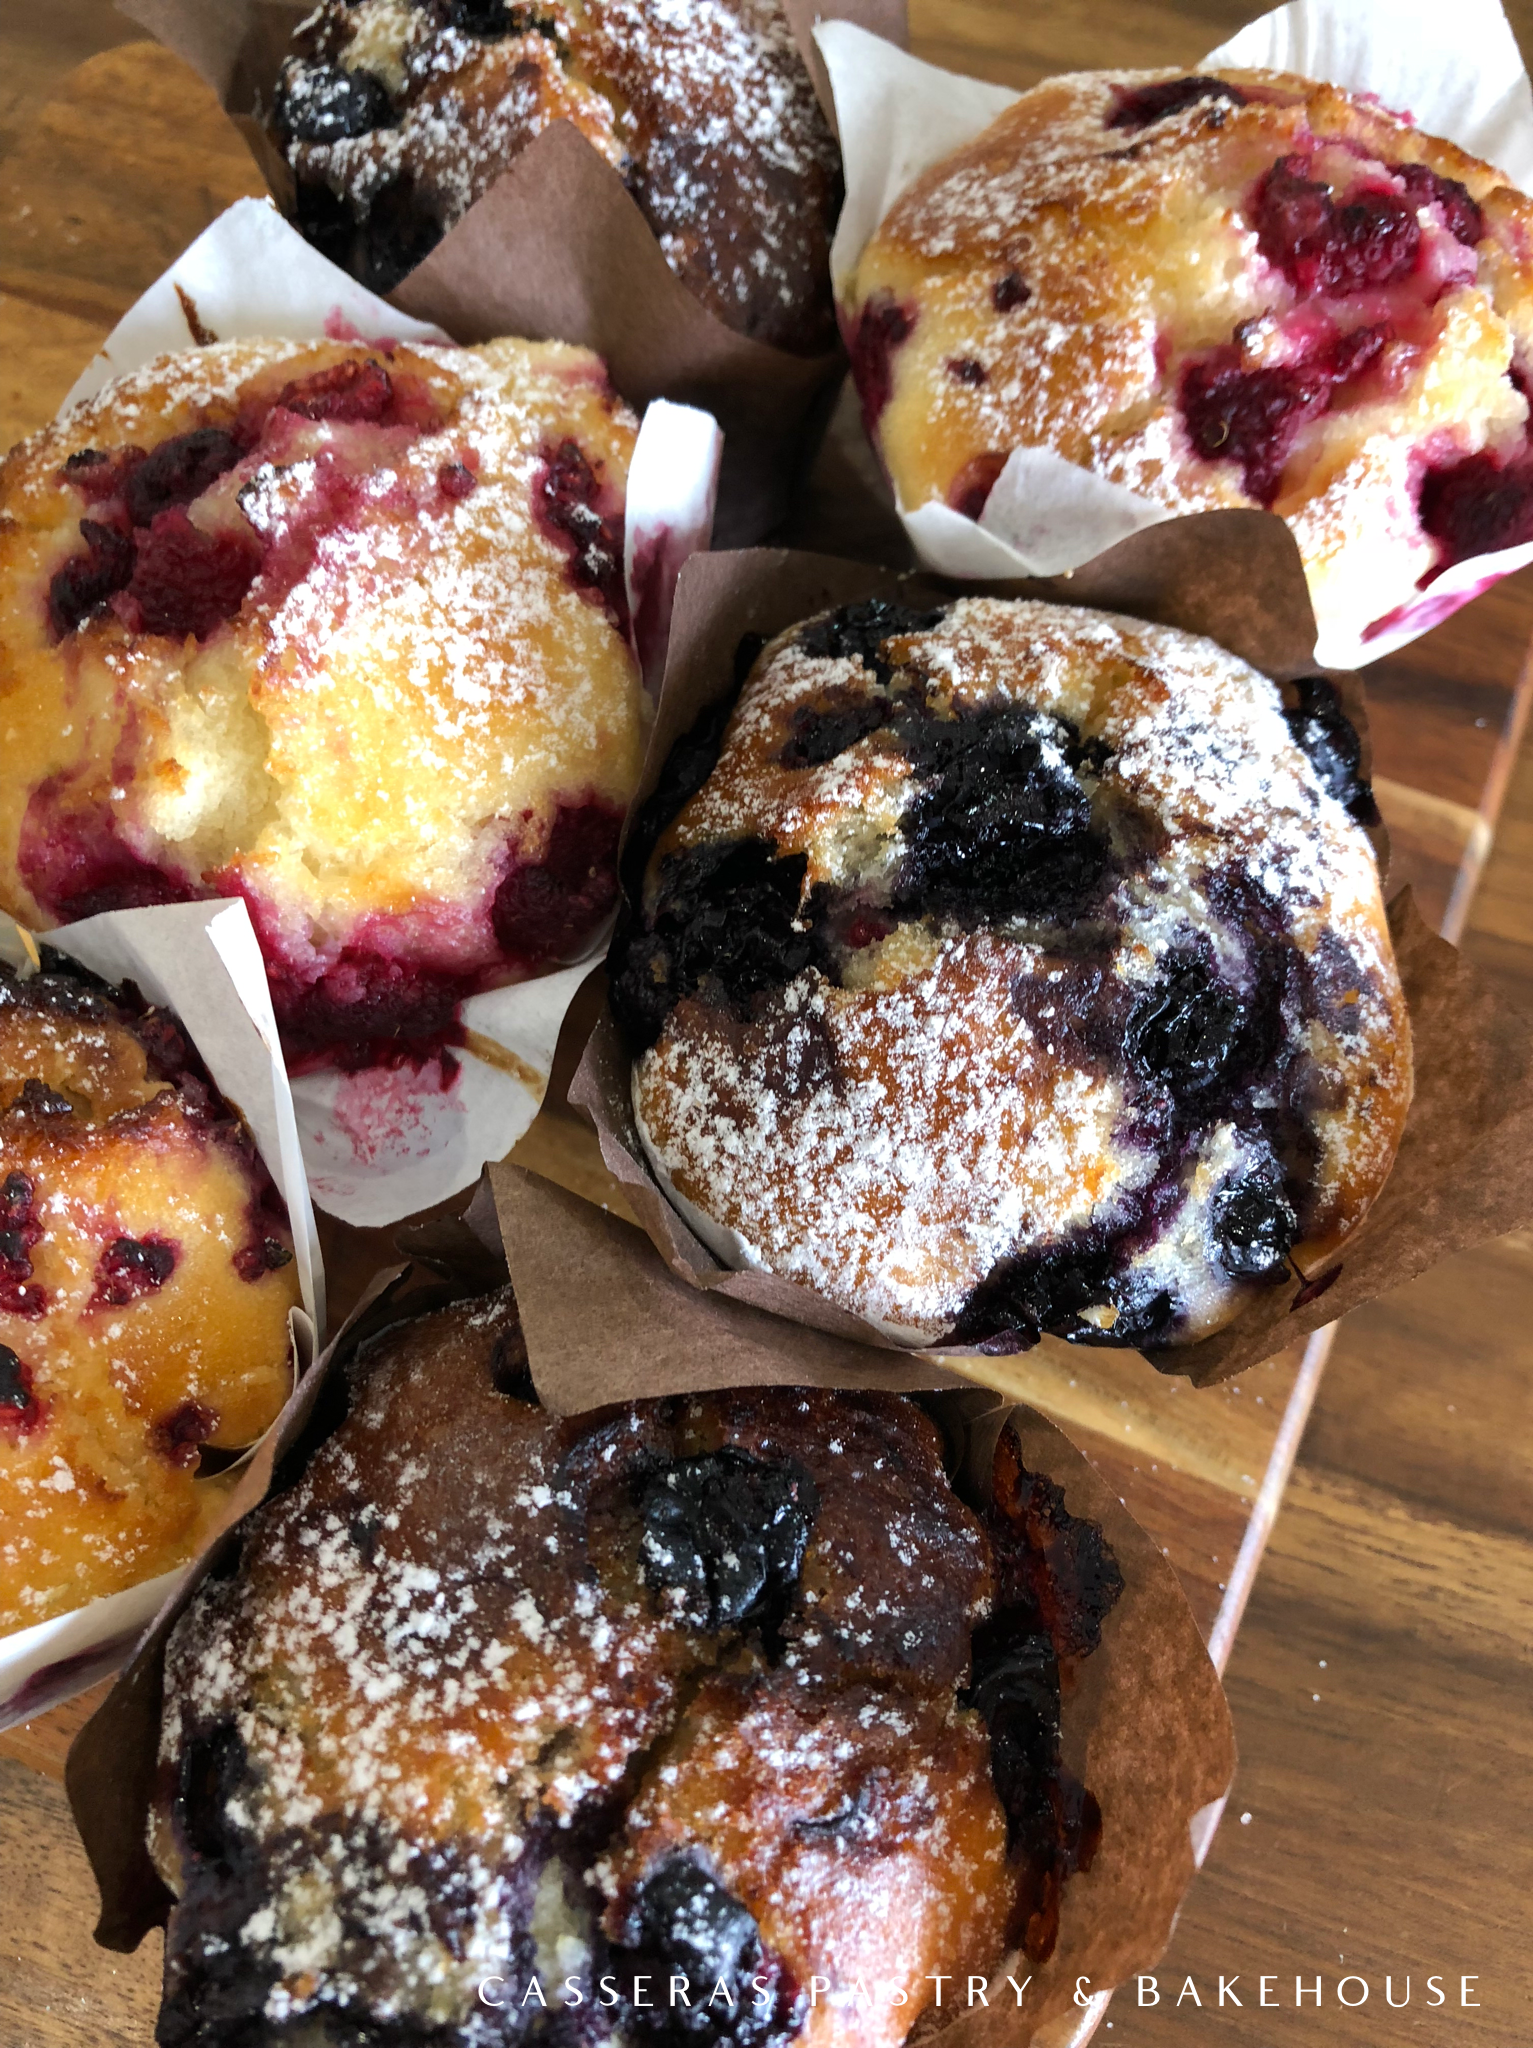 Muffins - optional three flavours